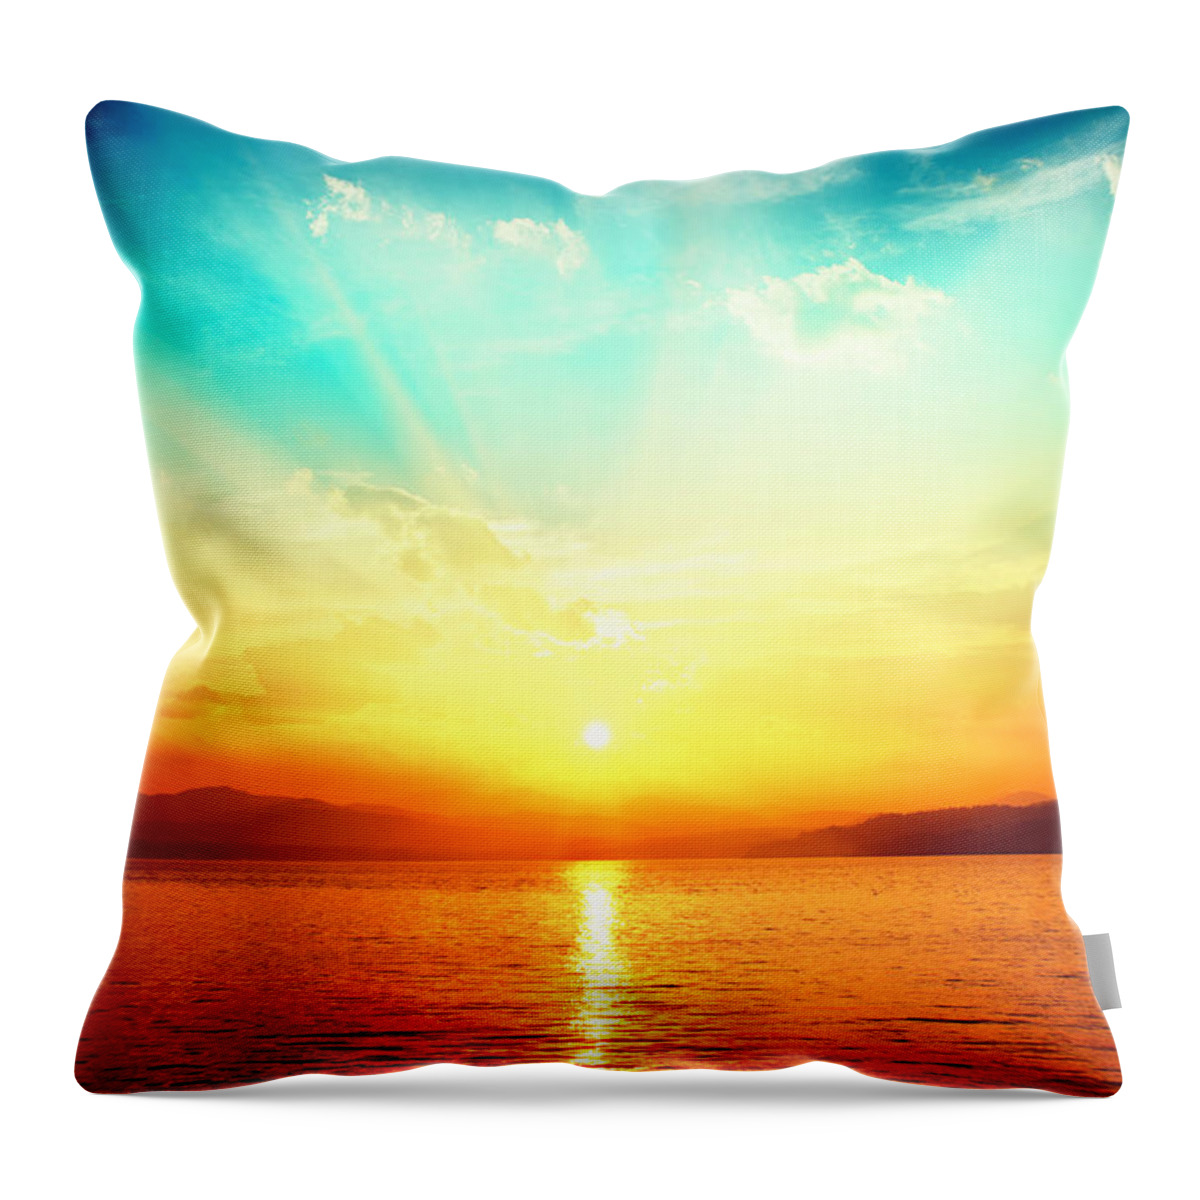 Scenics Throw Pillow featuring the photograph Sunset Over Water by Alexsava